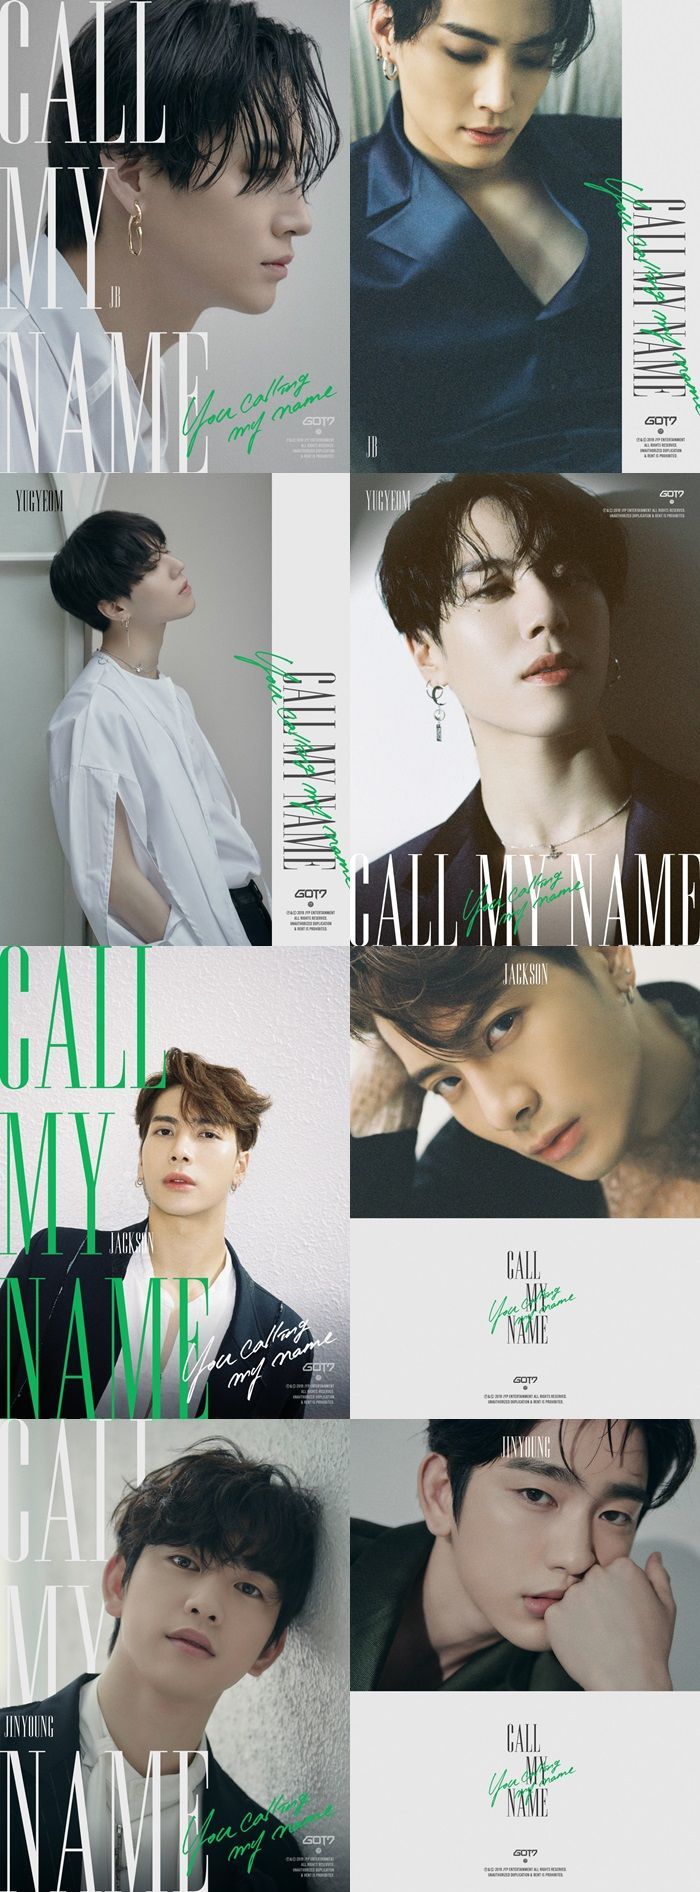 GOT7 (GOT7) has poured out 20 personal Teaser Images from the new album Call My Name (call My Name) at once.On the 28th, JB, yu-gum, Jackson, and Jinyoungs image were released on the official SNS channel, and the comeback atmosphere was warmed up.Their beauty was evident in the presence of GOT7, which is represented by visual group. Images contain the faces of members captured from various angles.JB and yu-gum caused a heartbeat with a perfect sideline that seemed to be shaved, and Jackson and Jinyoung fired deep eyes calling for close-ups.In addition, sexy suits and desolate eyes harmonized with a strange harmony and created a unique atmosphere.On the other hand, GOT7 announces Call My Name and title song My Name You Call at 6 pm on November 4th.Before the return of six months, we are pouring out a lot of comeback content, such as prologue film, group Teaser, and opening five types of Teaser Image for each member.The comeback title song My Name You Call is about the meaning of the name GOT7 that fans call.Expectations are high on what explosive synergy will be achieved by adding a heartfelt message.